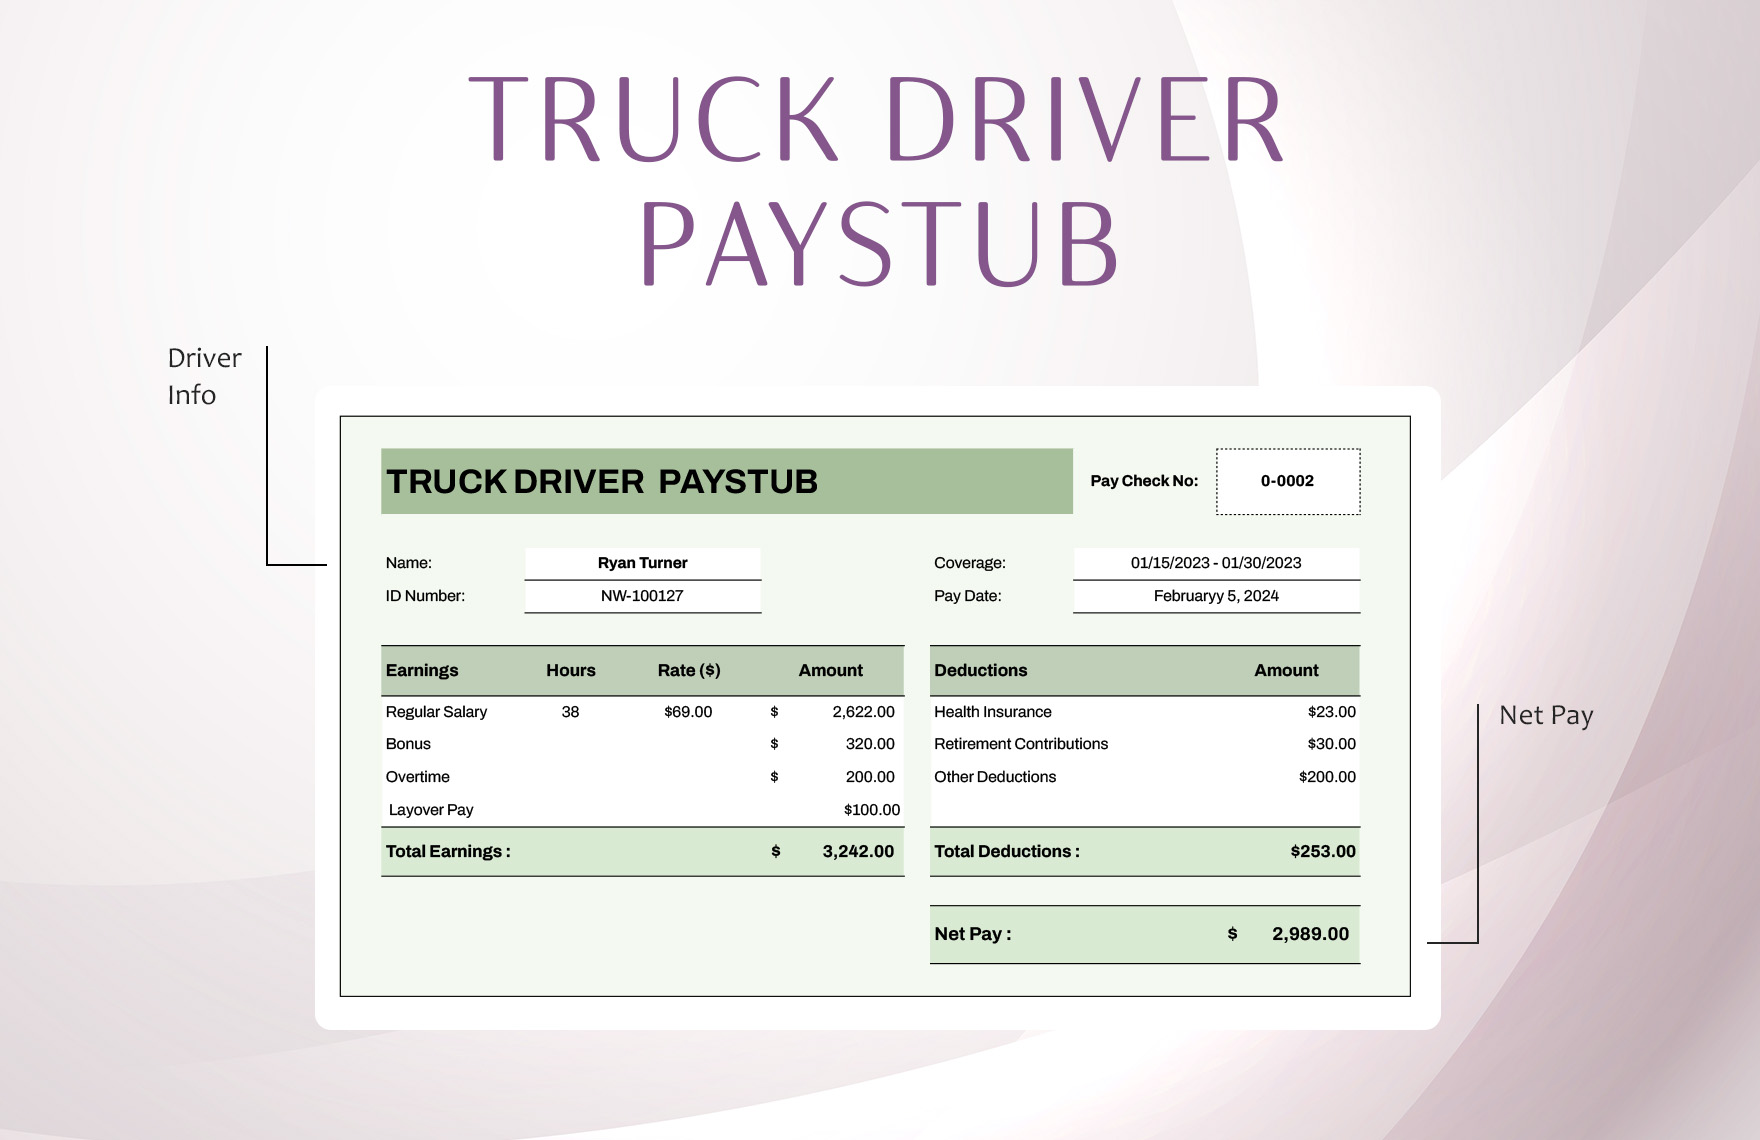 Truck Driver Paystub Template